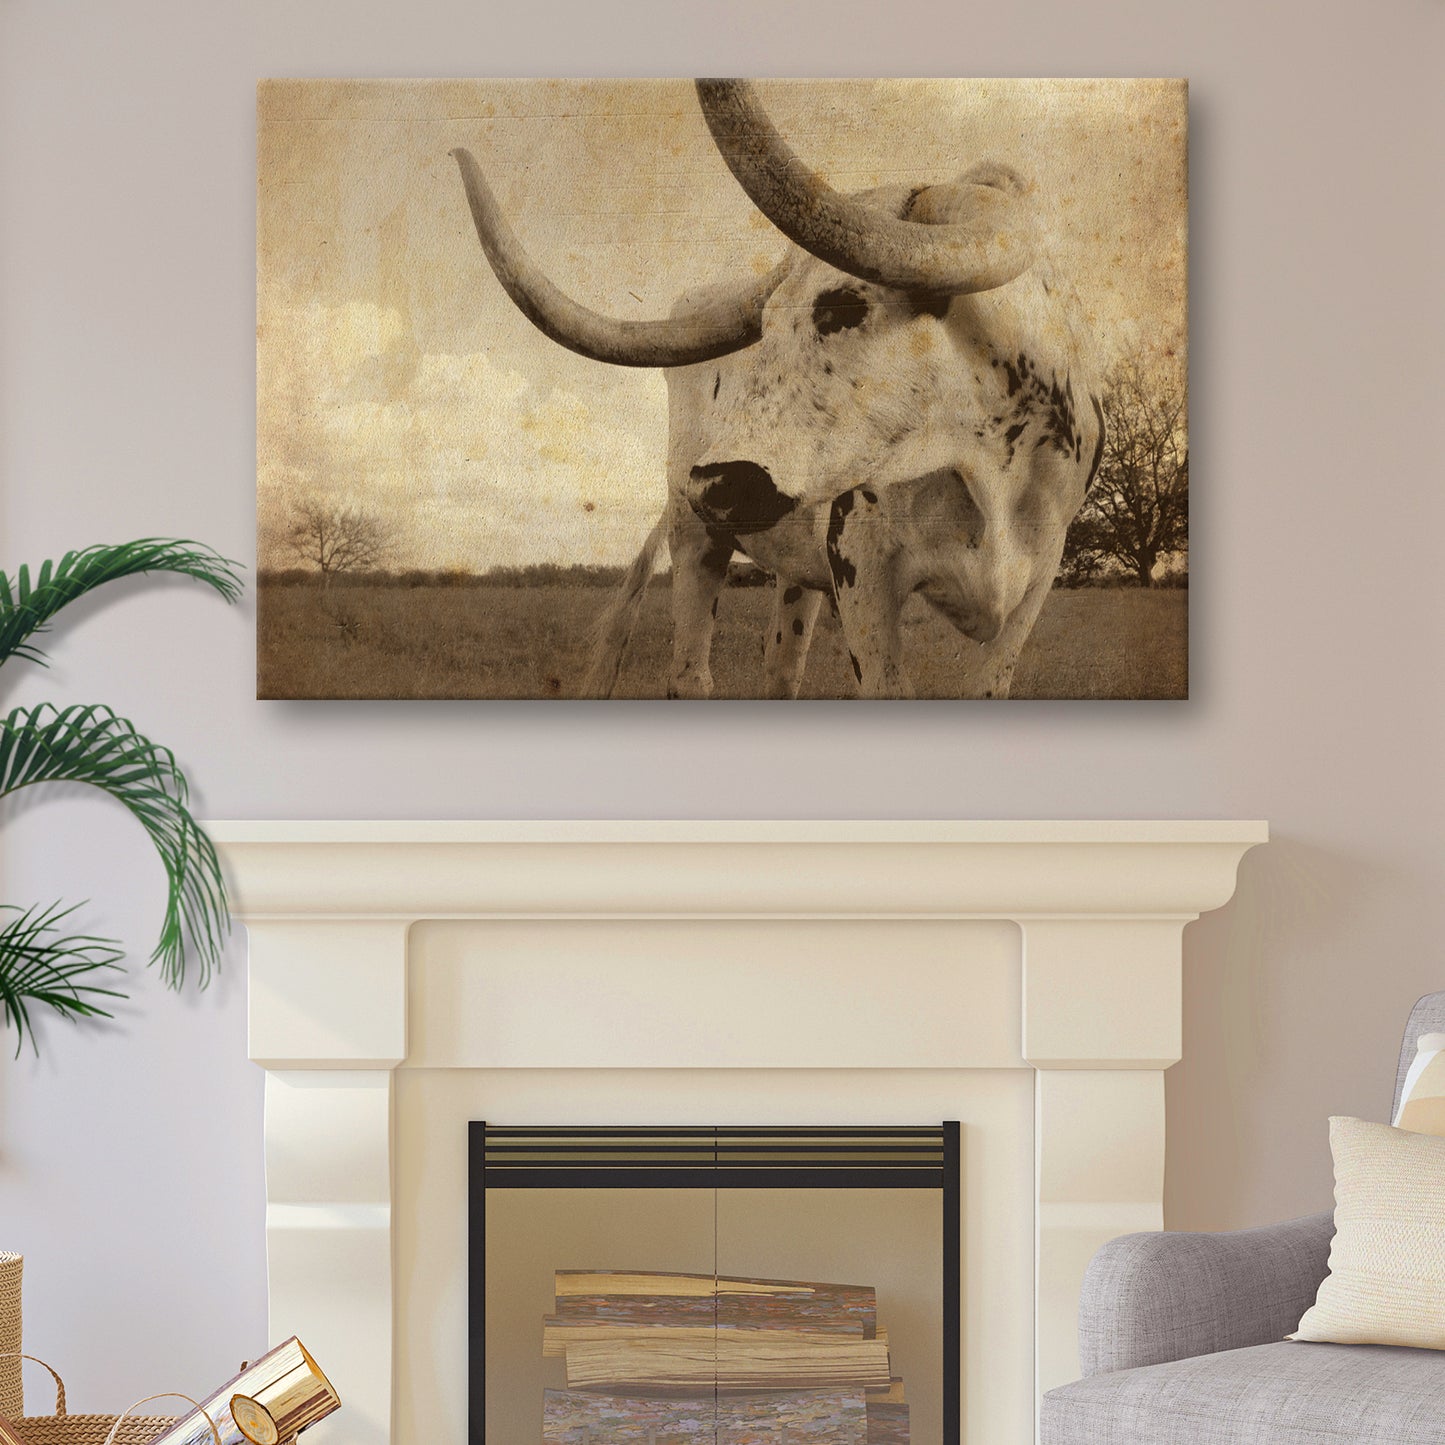 Vintage Longhorn Cattle Canvas Wall Art - Image by Tailored Canvases